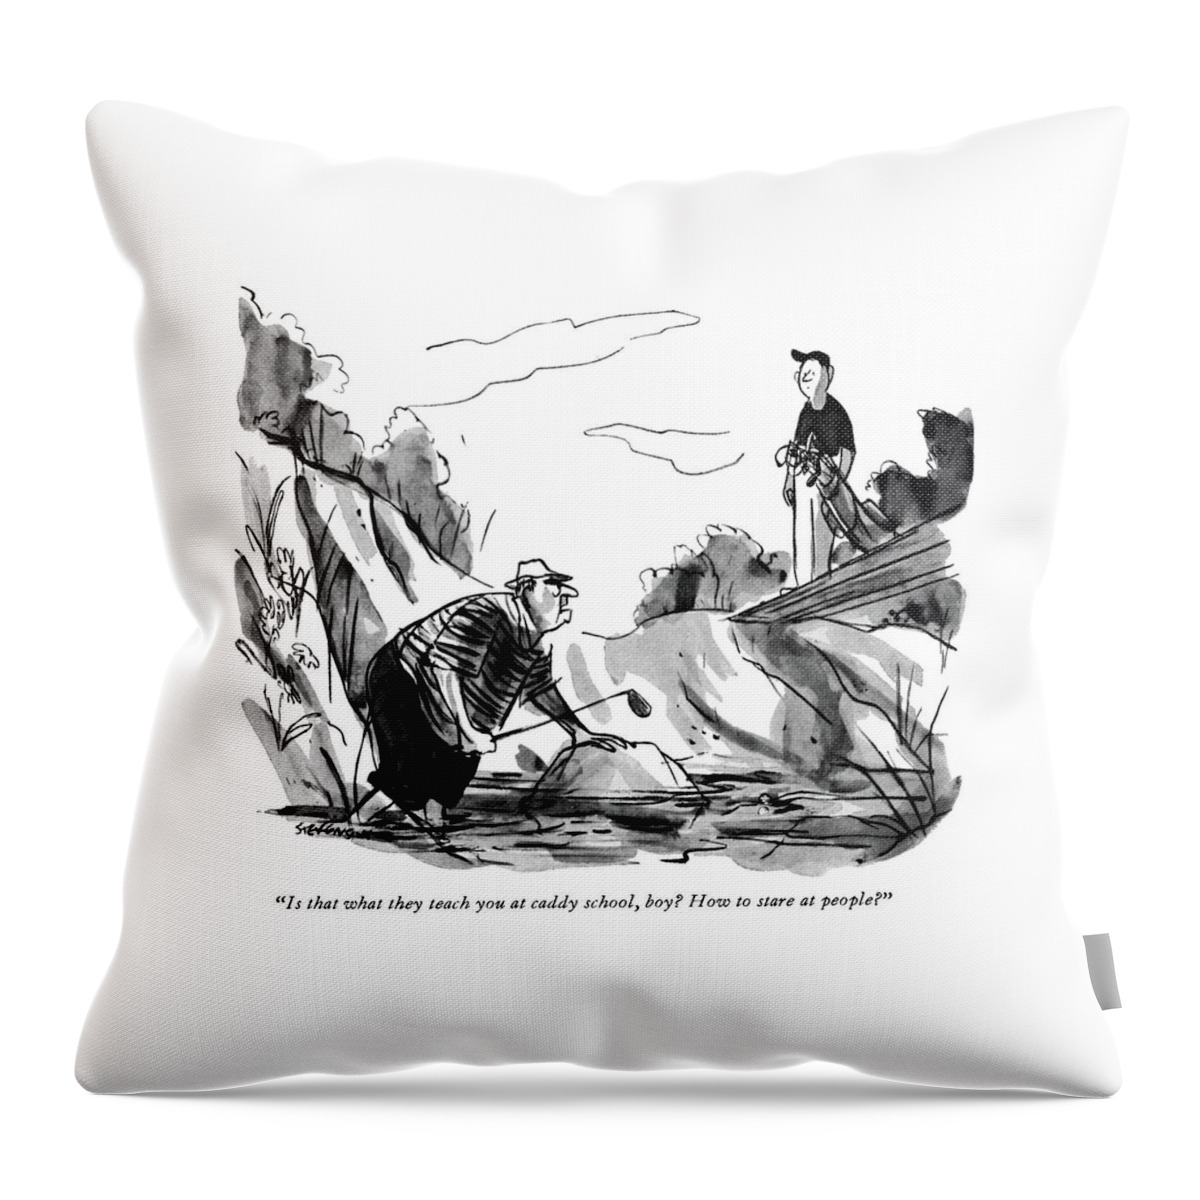 Is That What They Teach You At Caddy School Throw Pillow